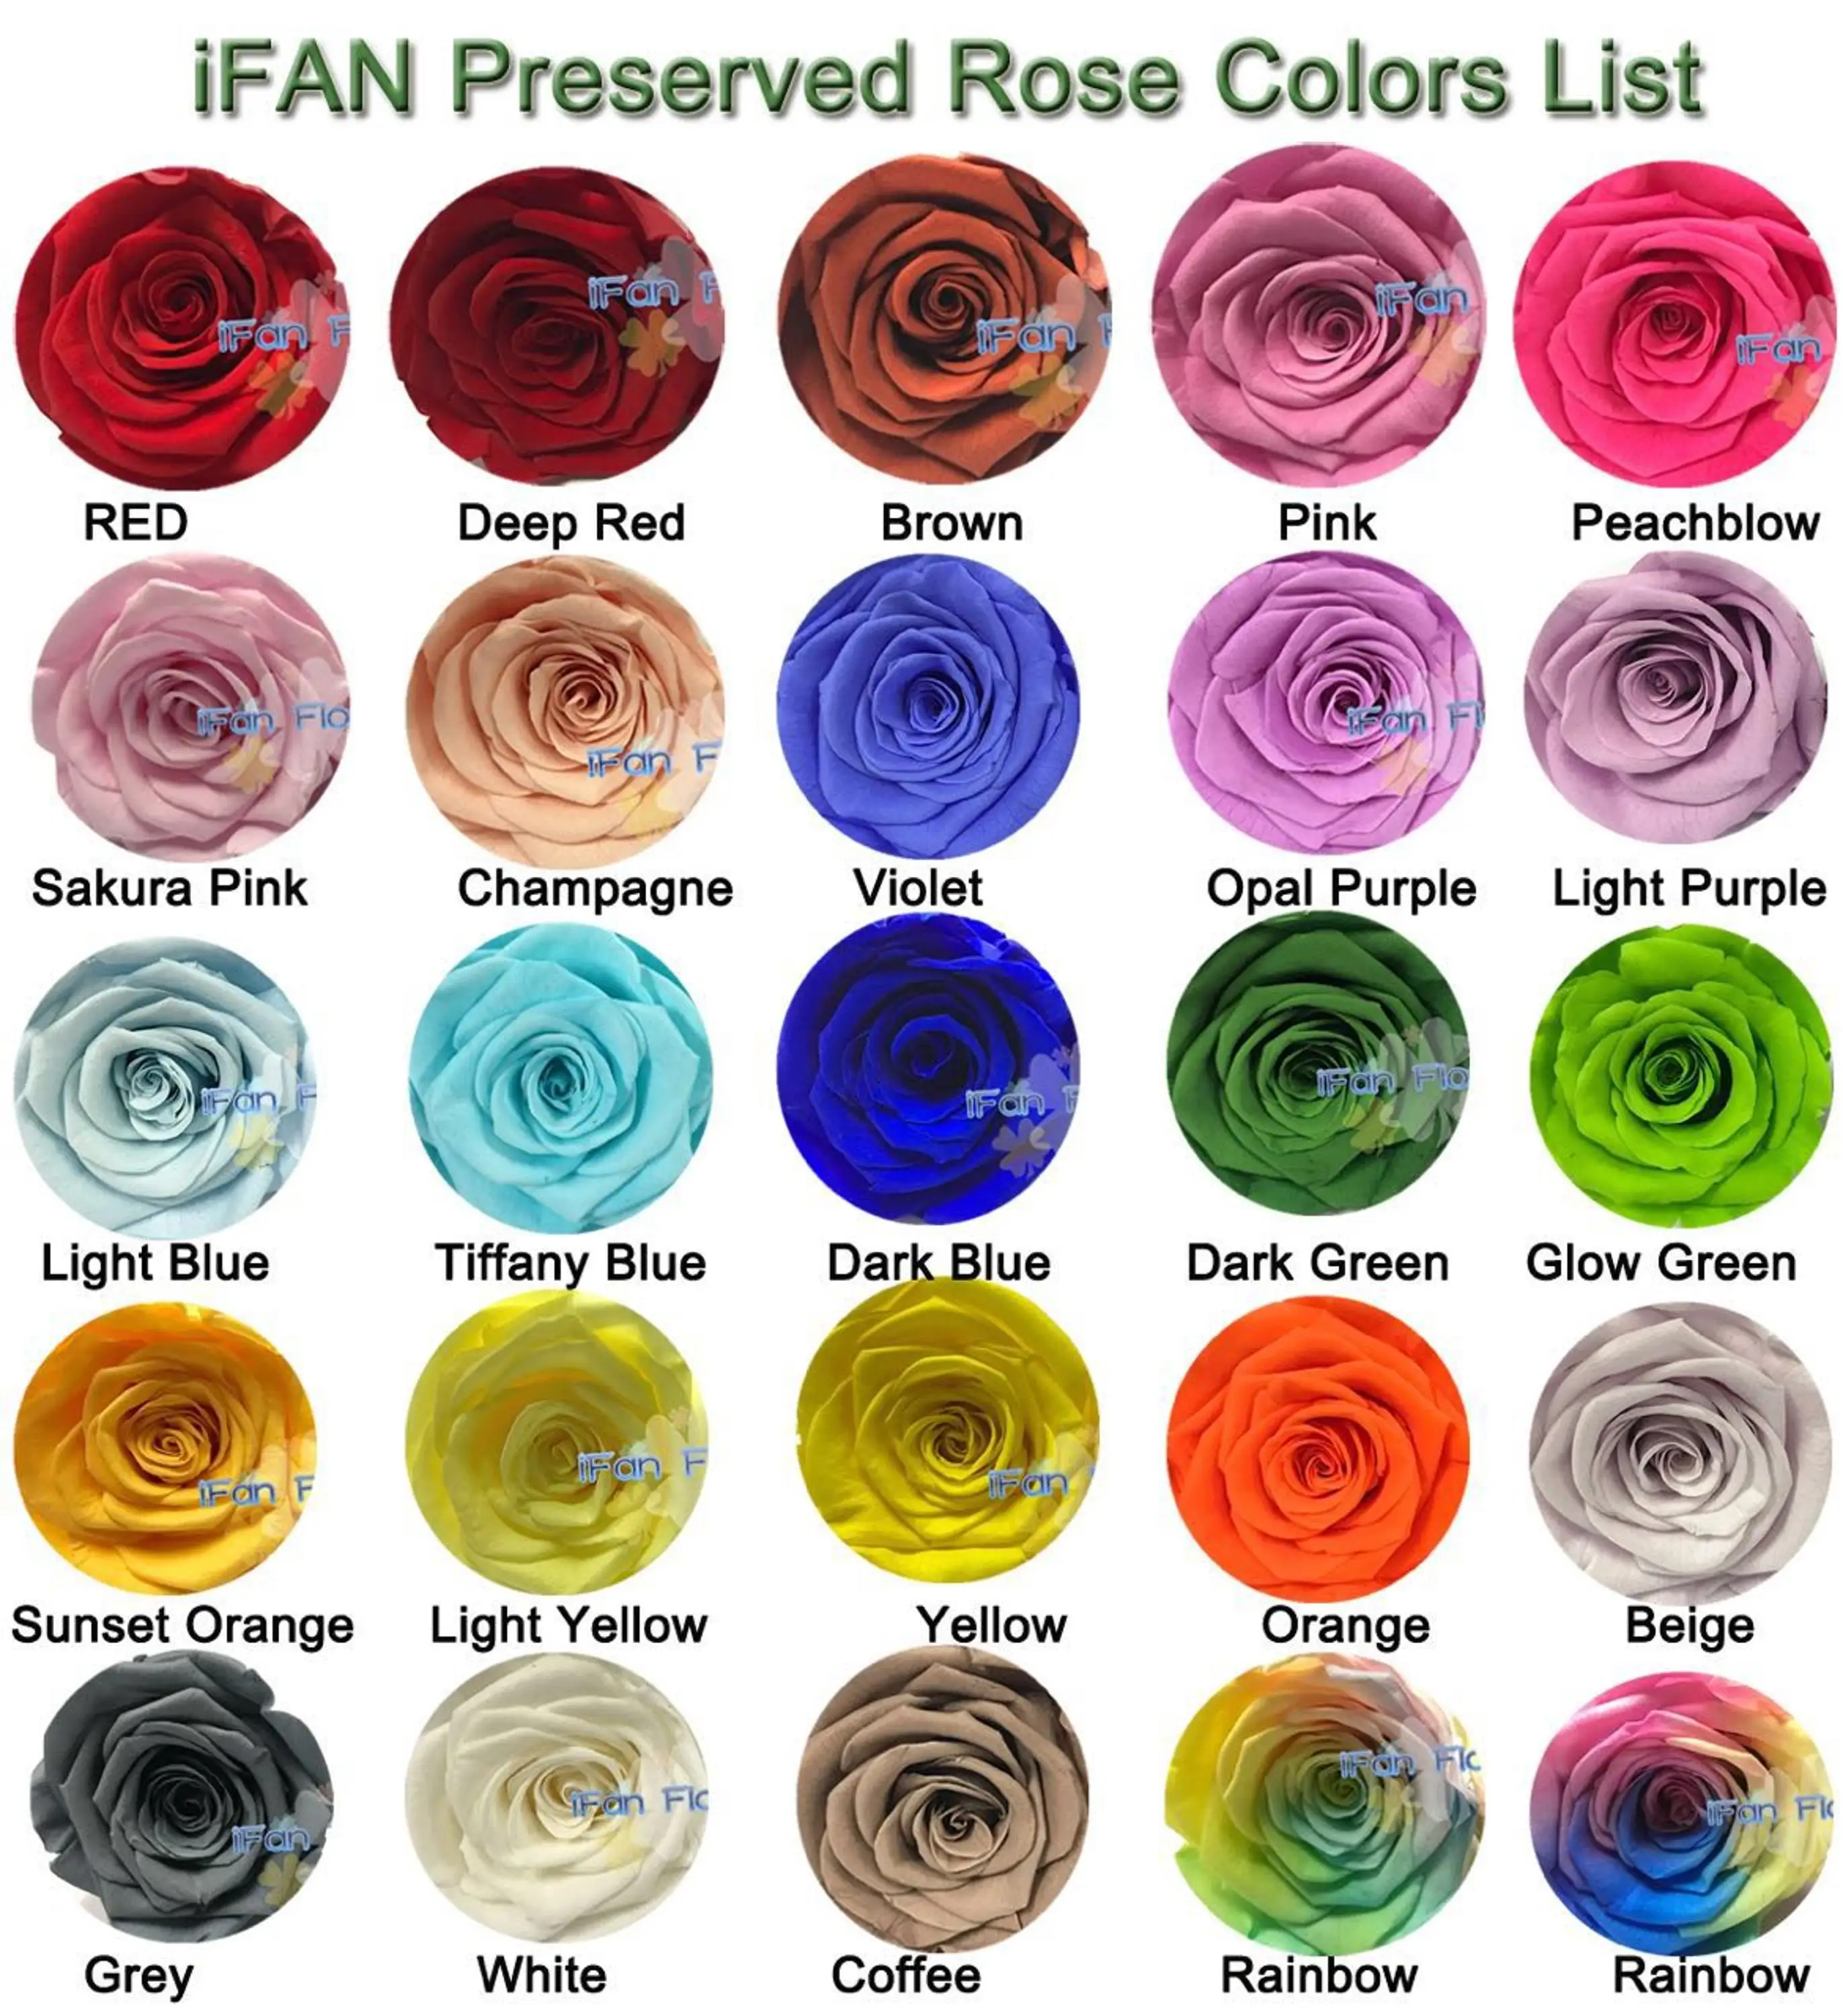 rose types of flowers with pictures Different rose flower types ...